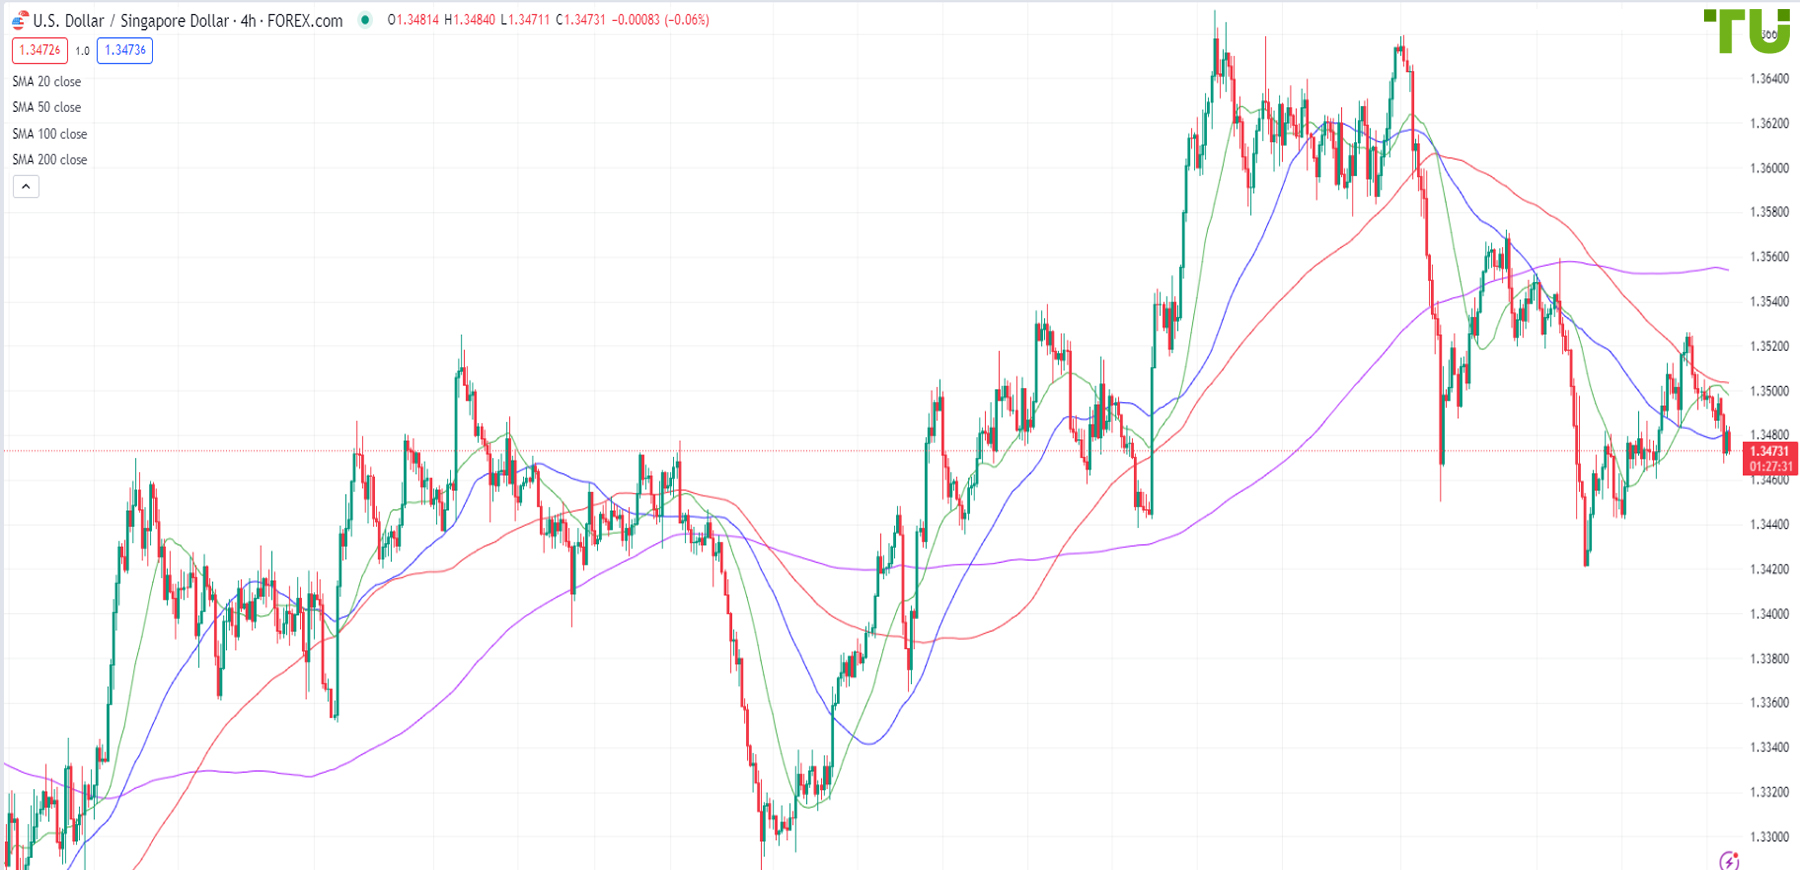 USD/SGD is under pressure again